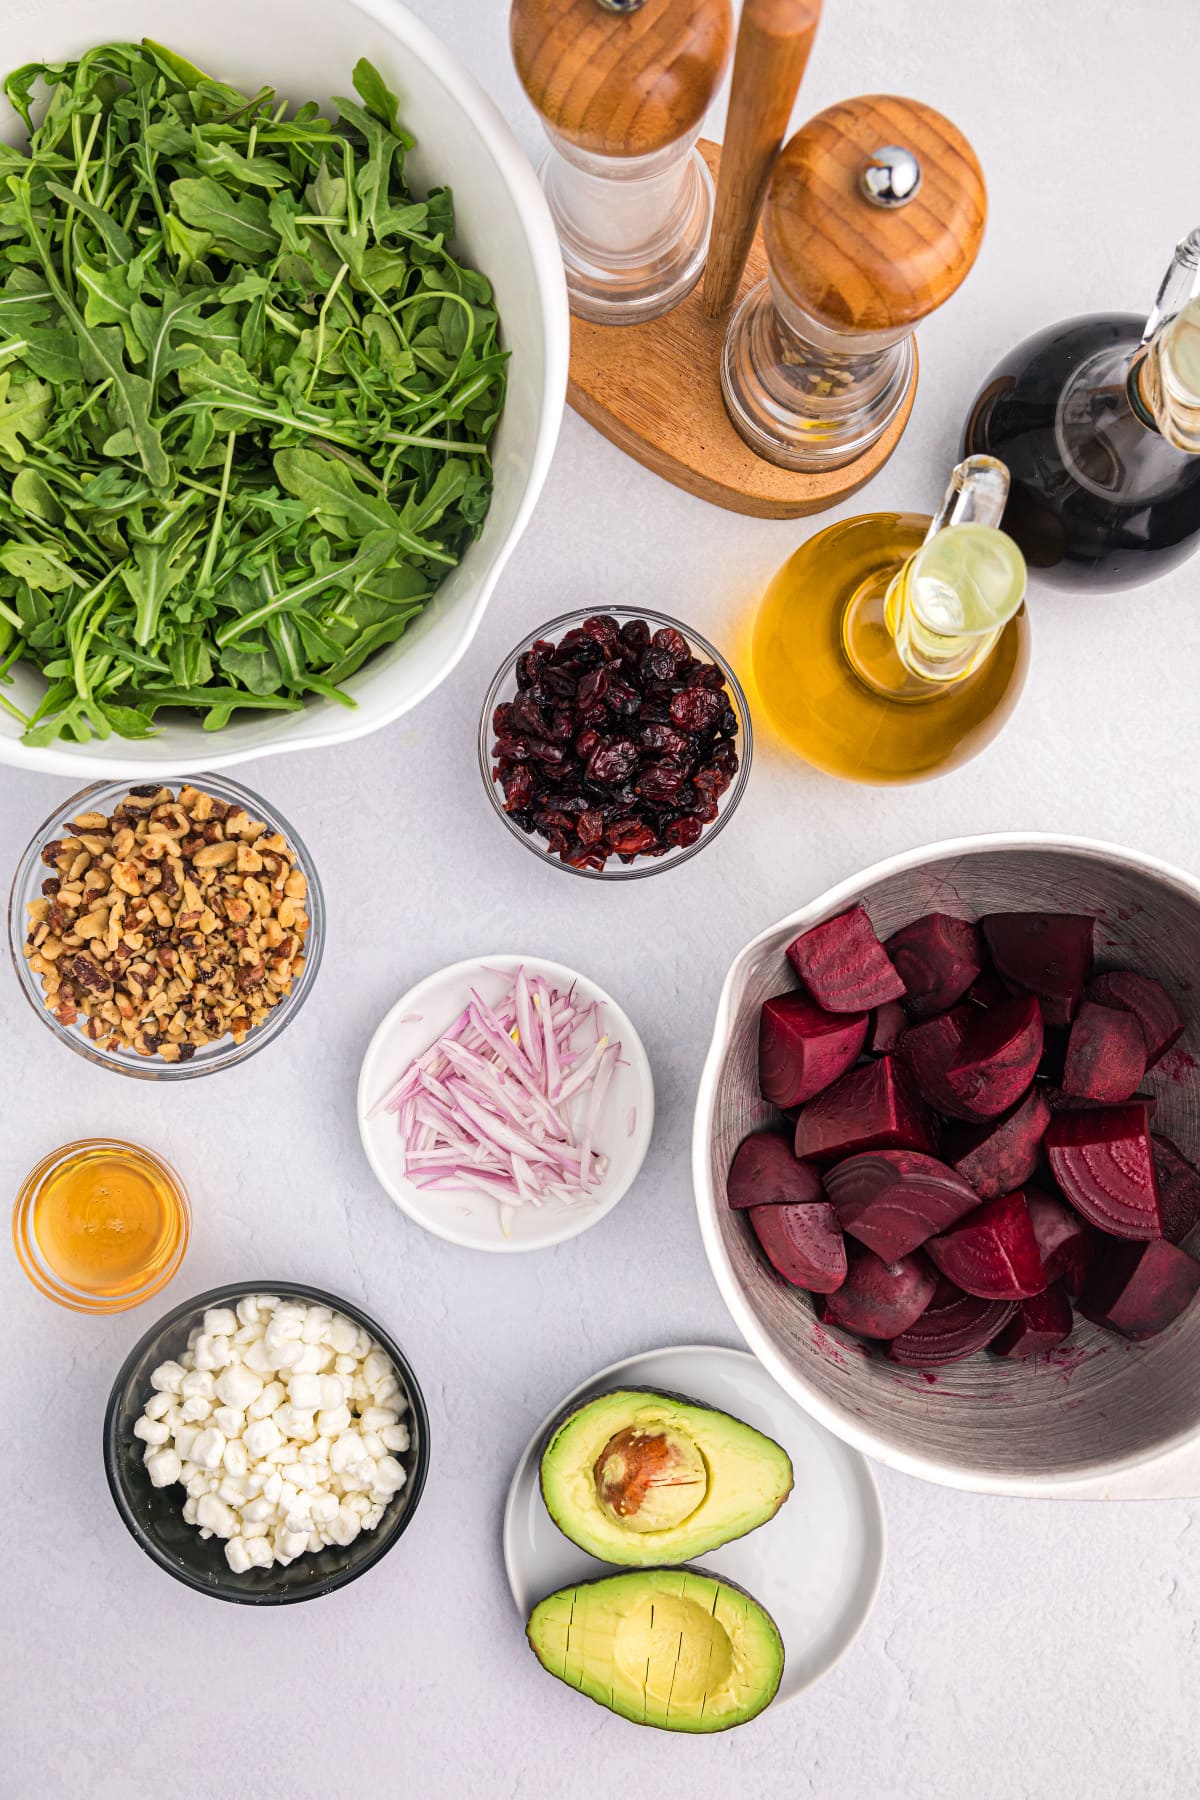 ingredients displayed for making beet and goat cheese arugula salad